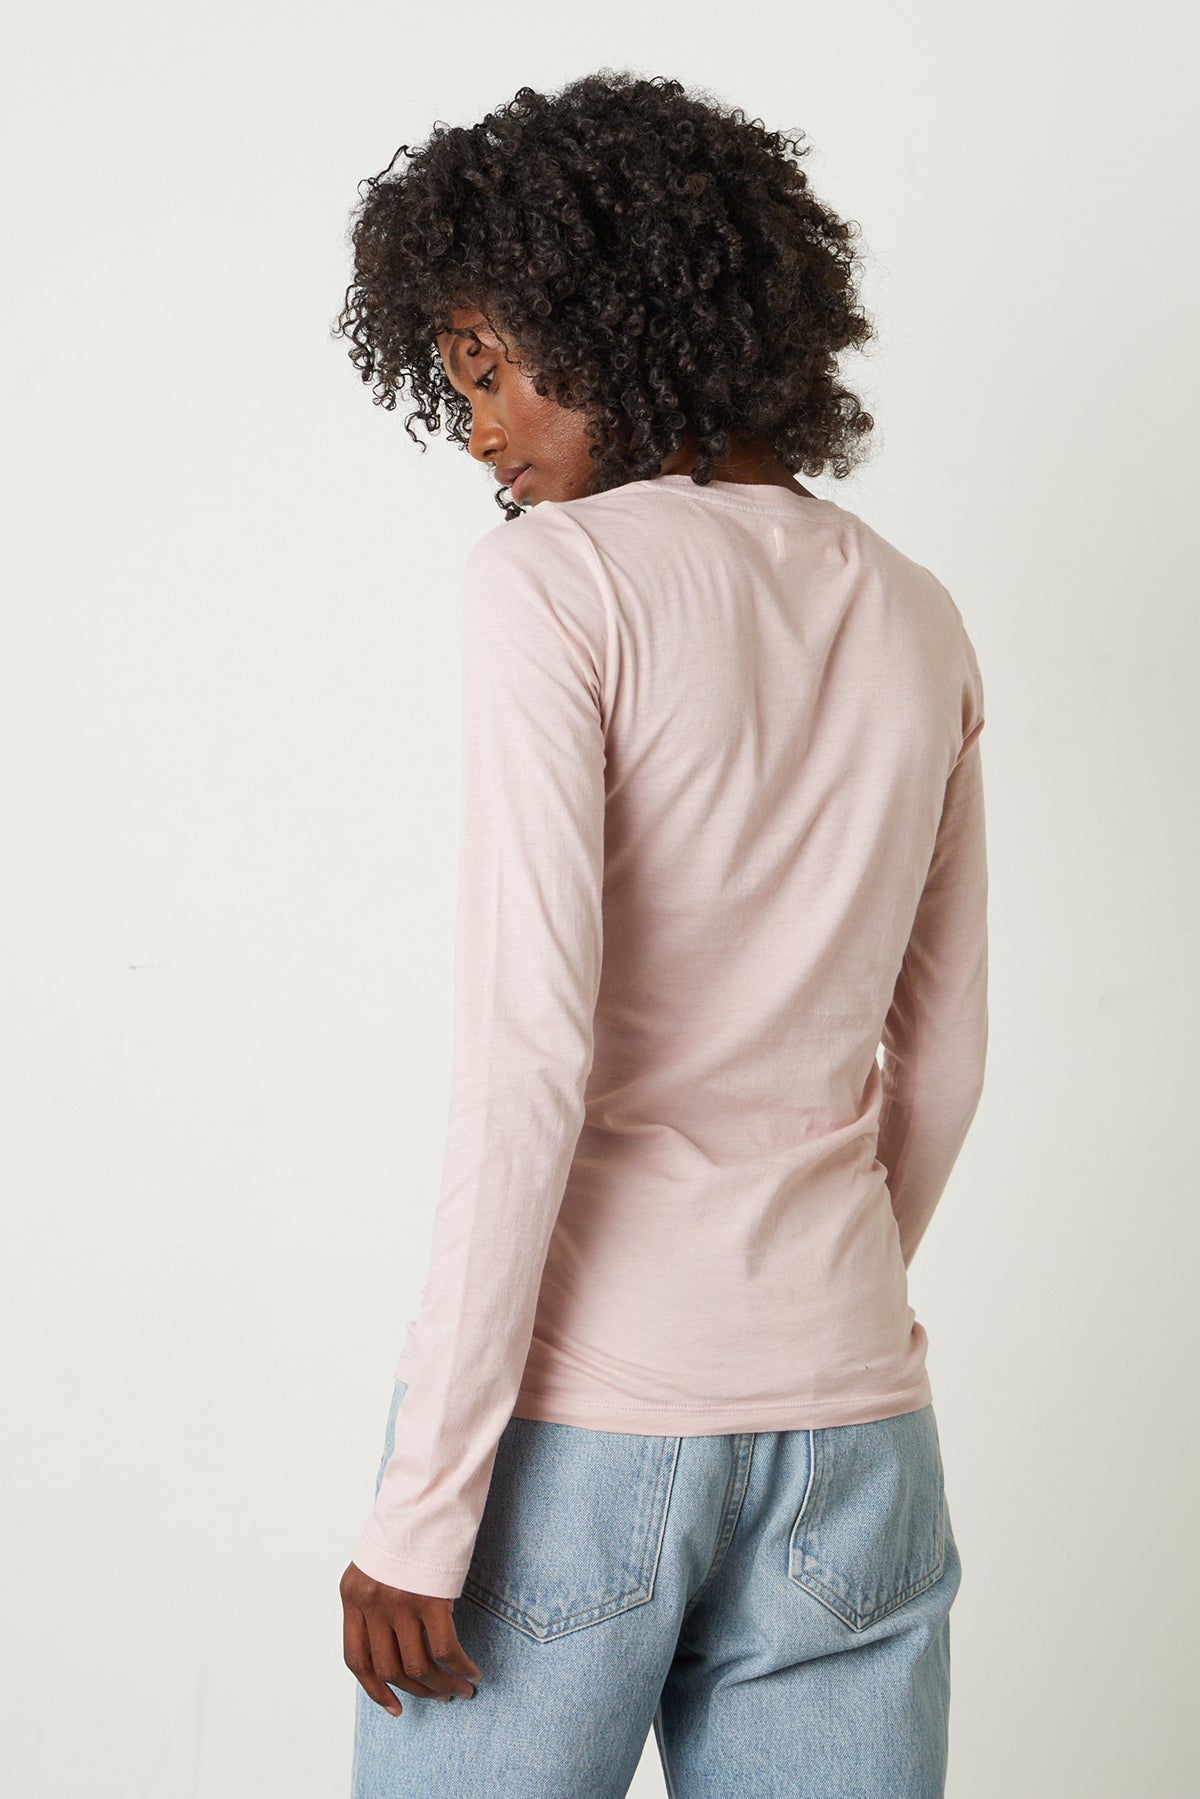 Zofina Gauzy Whisper Fitted Crew Neck Tee with long sleeves in light pink ribbon color and light blue denim back-26632448868545